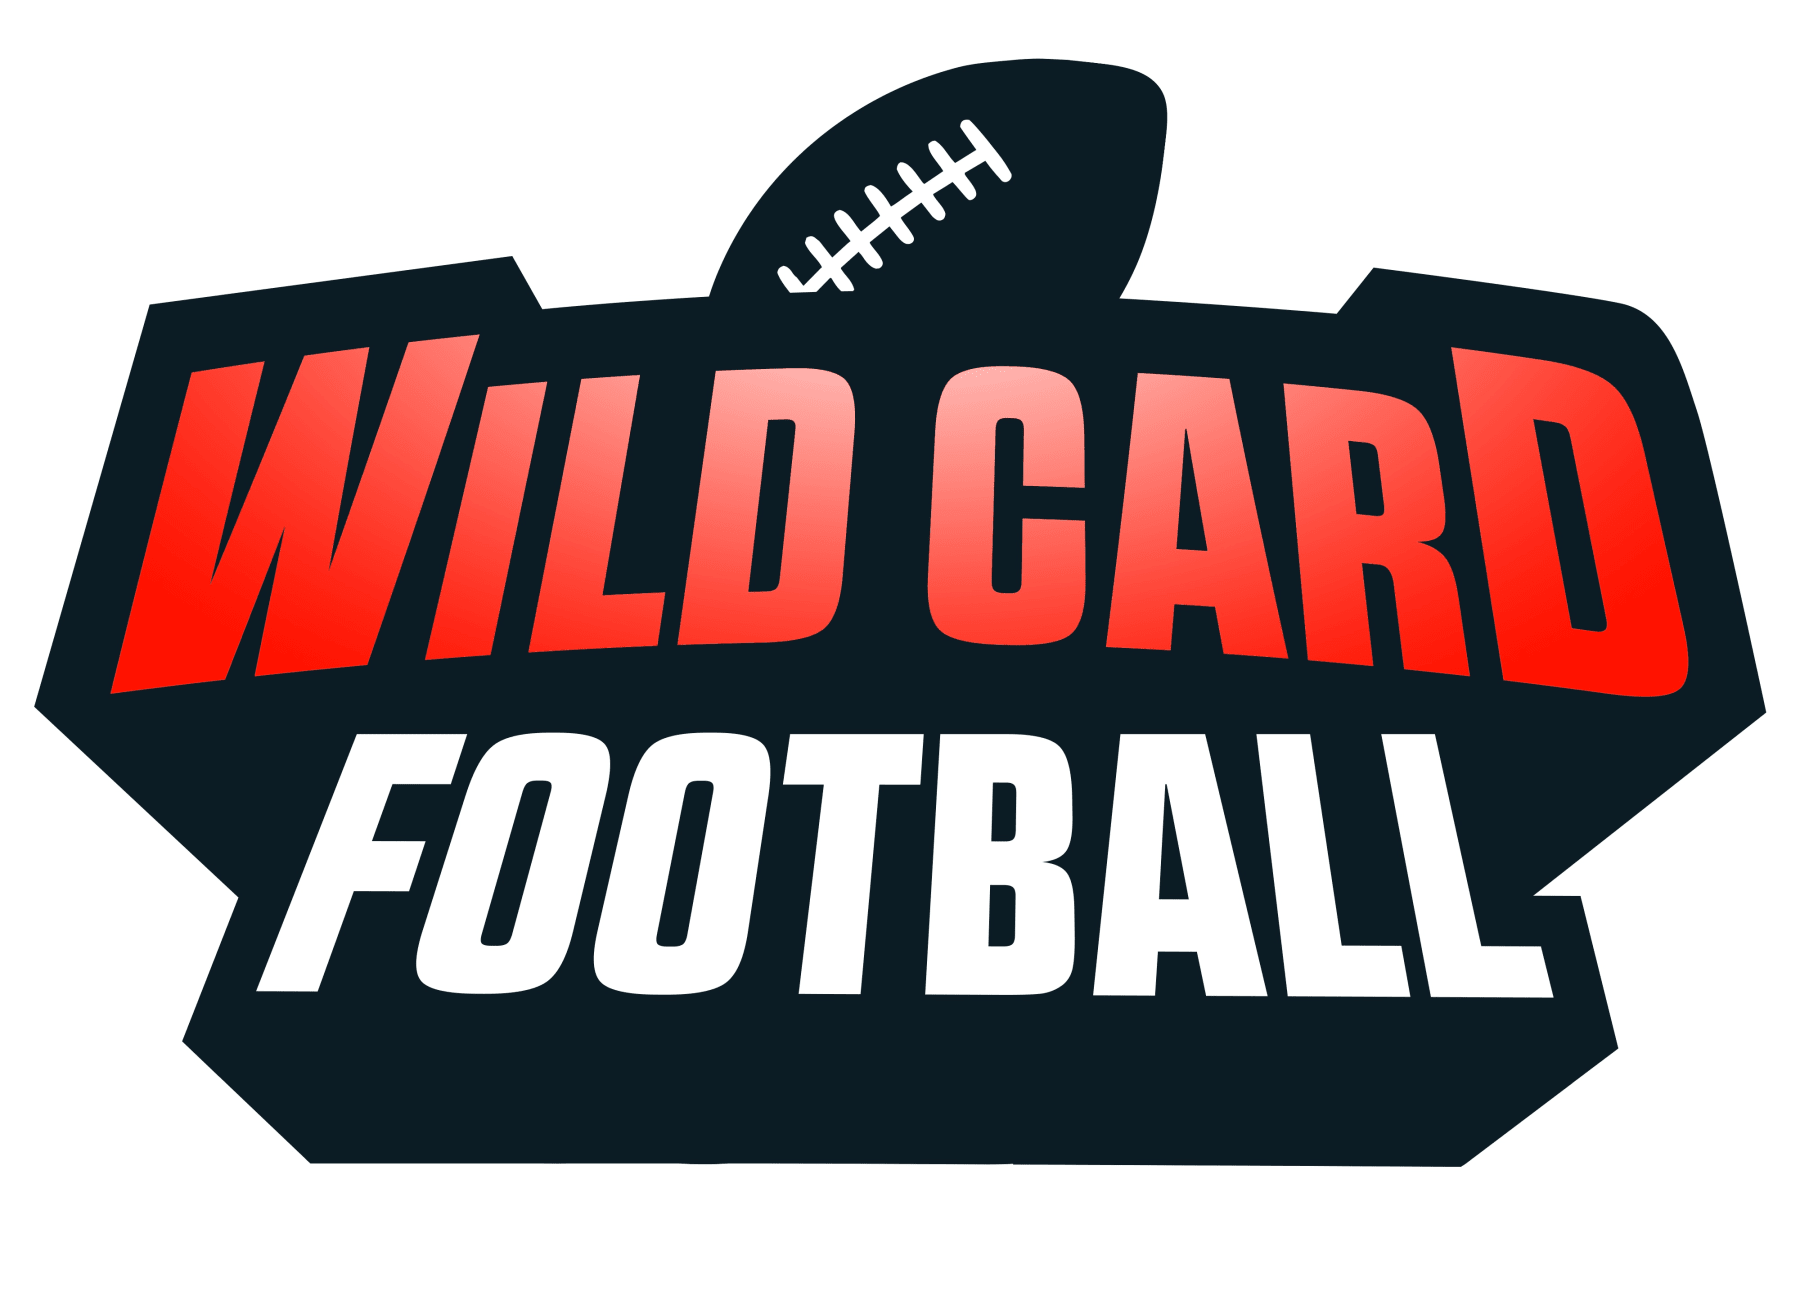 Wild Card Football announced for Switch